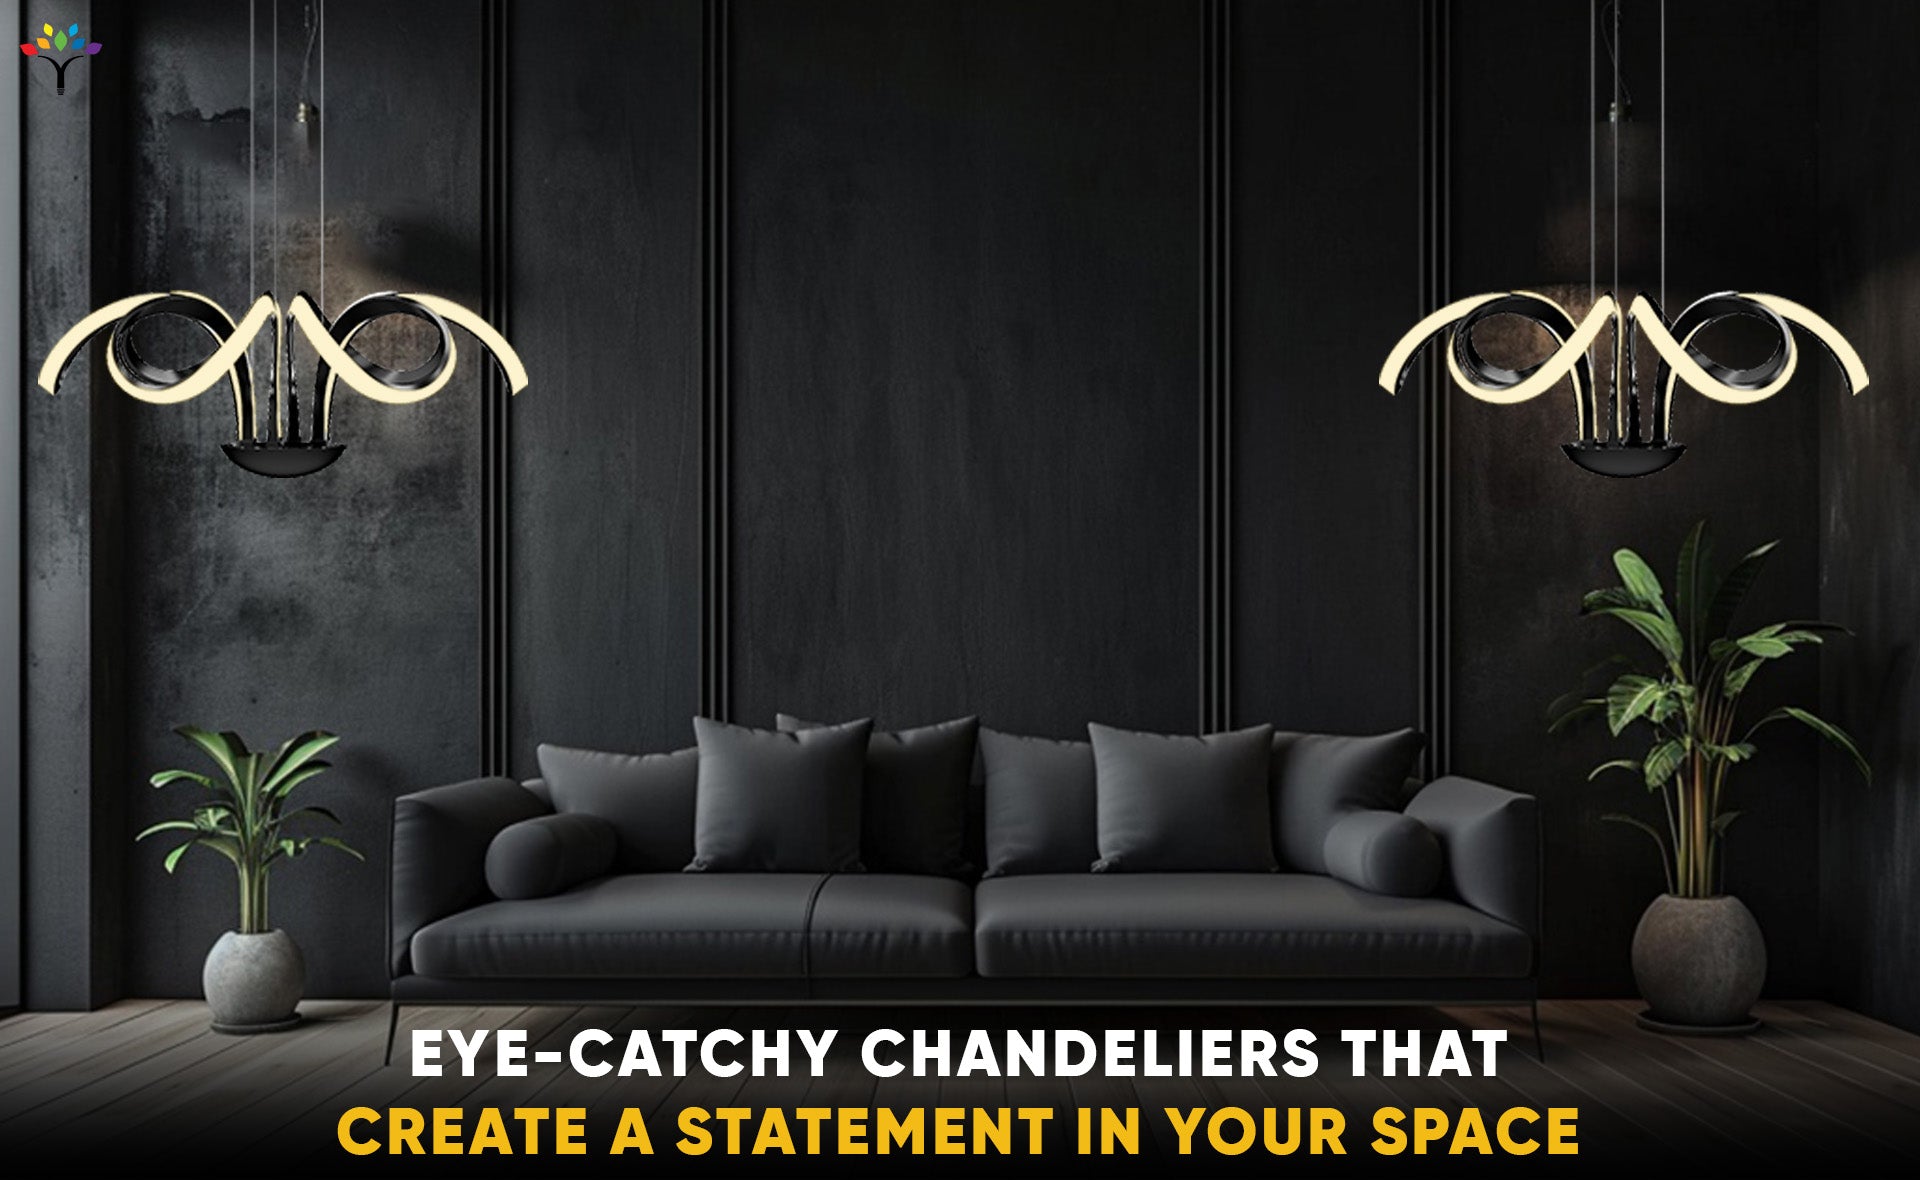 Eye-Catchy Chandeliers